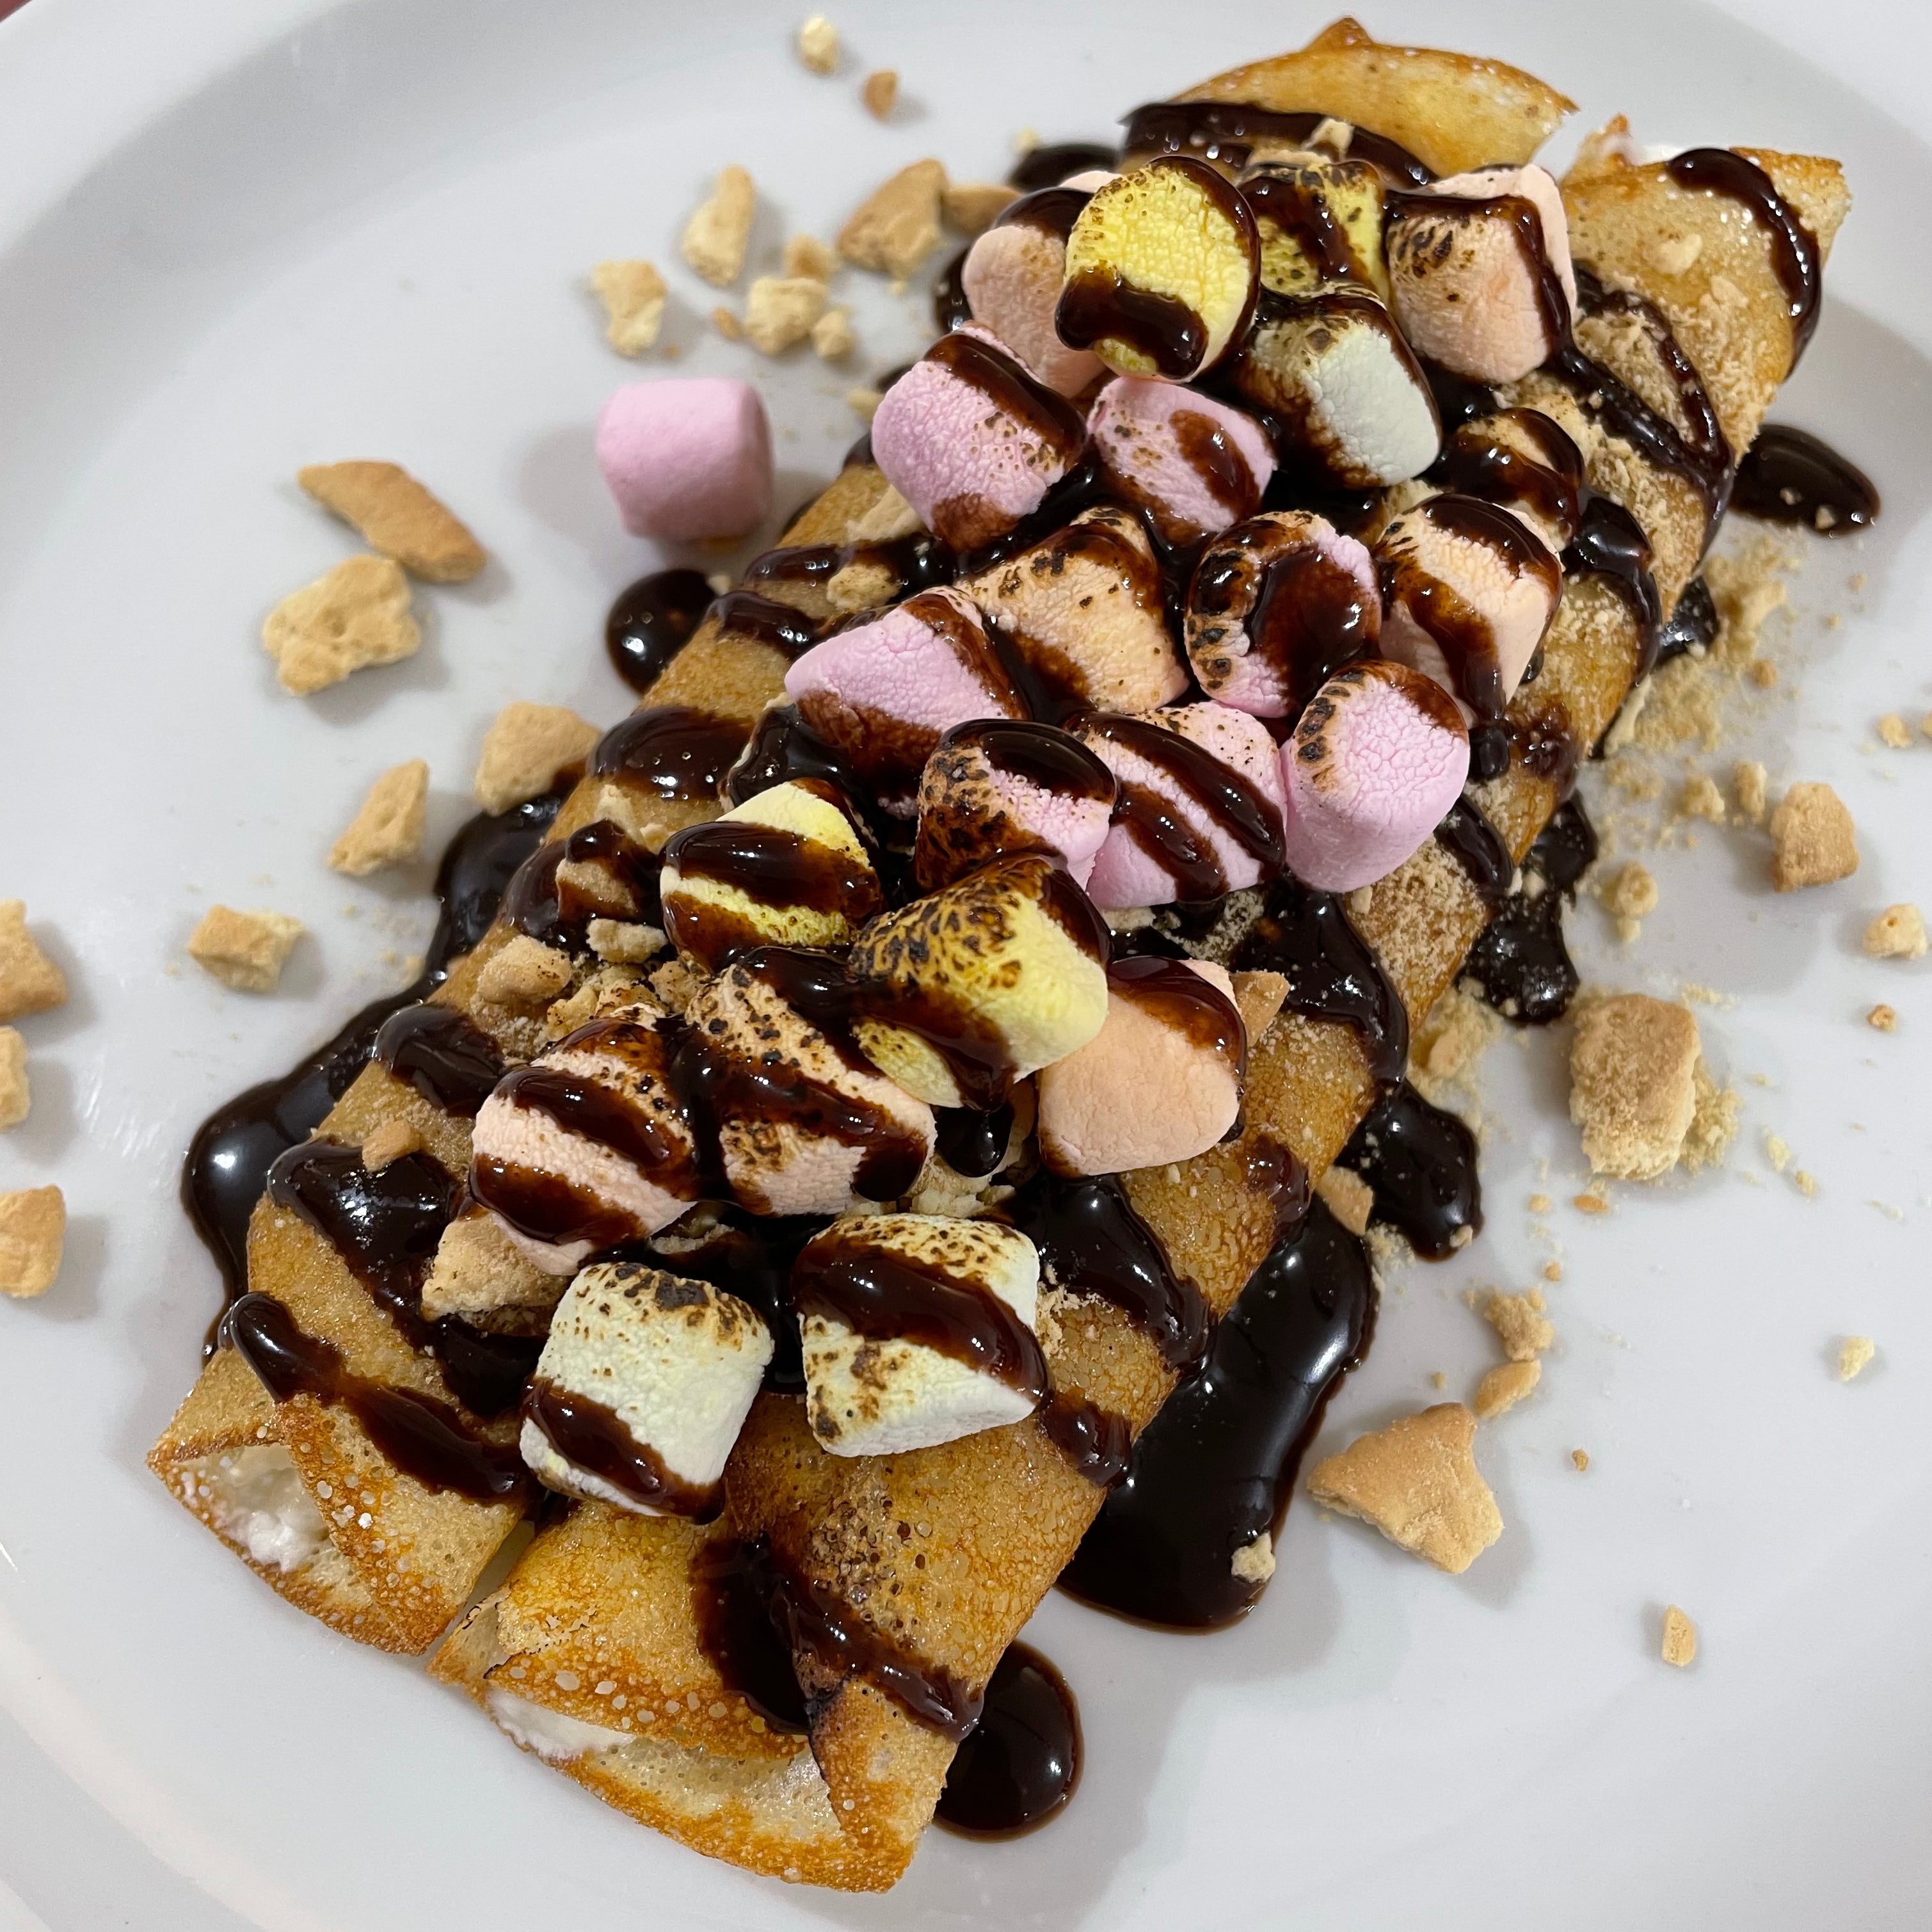 S'mores Crepe with marshmallow, cookies and chocolate drizzle. Unique dessert in Toronto